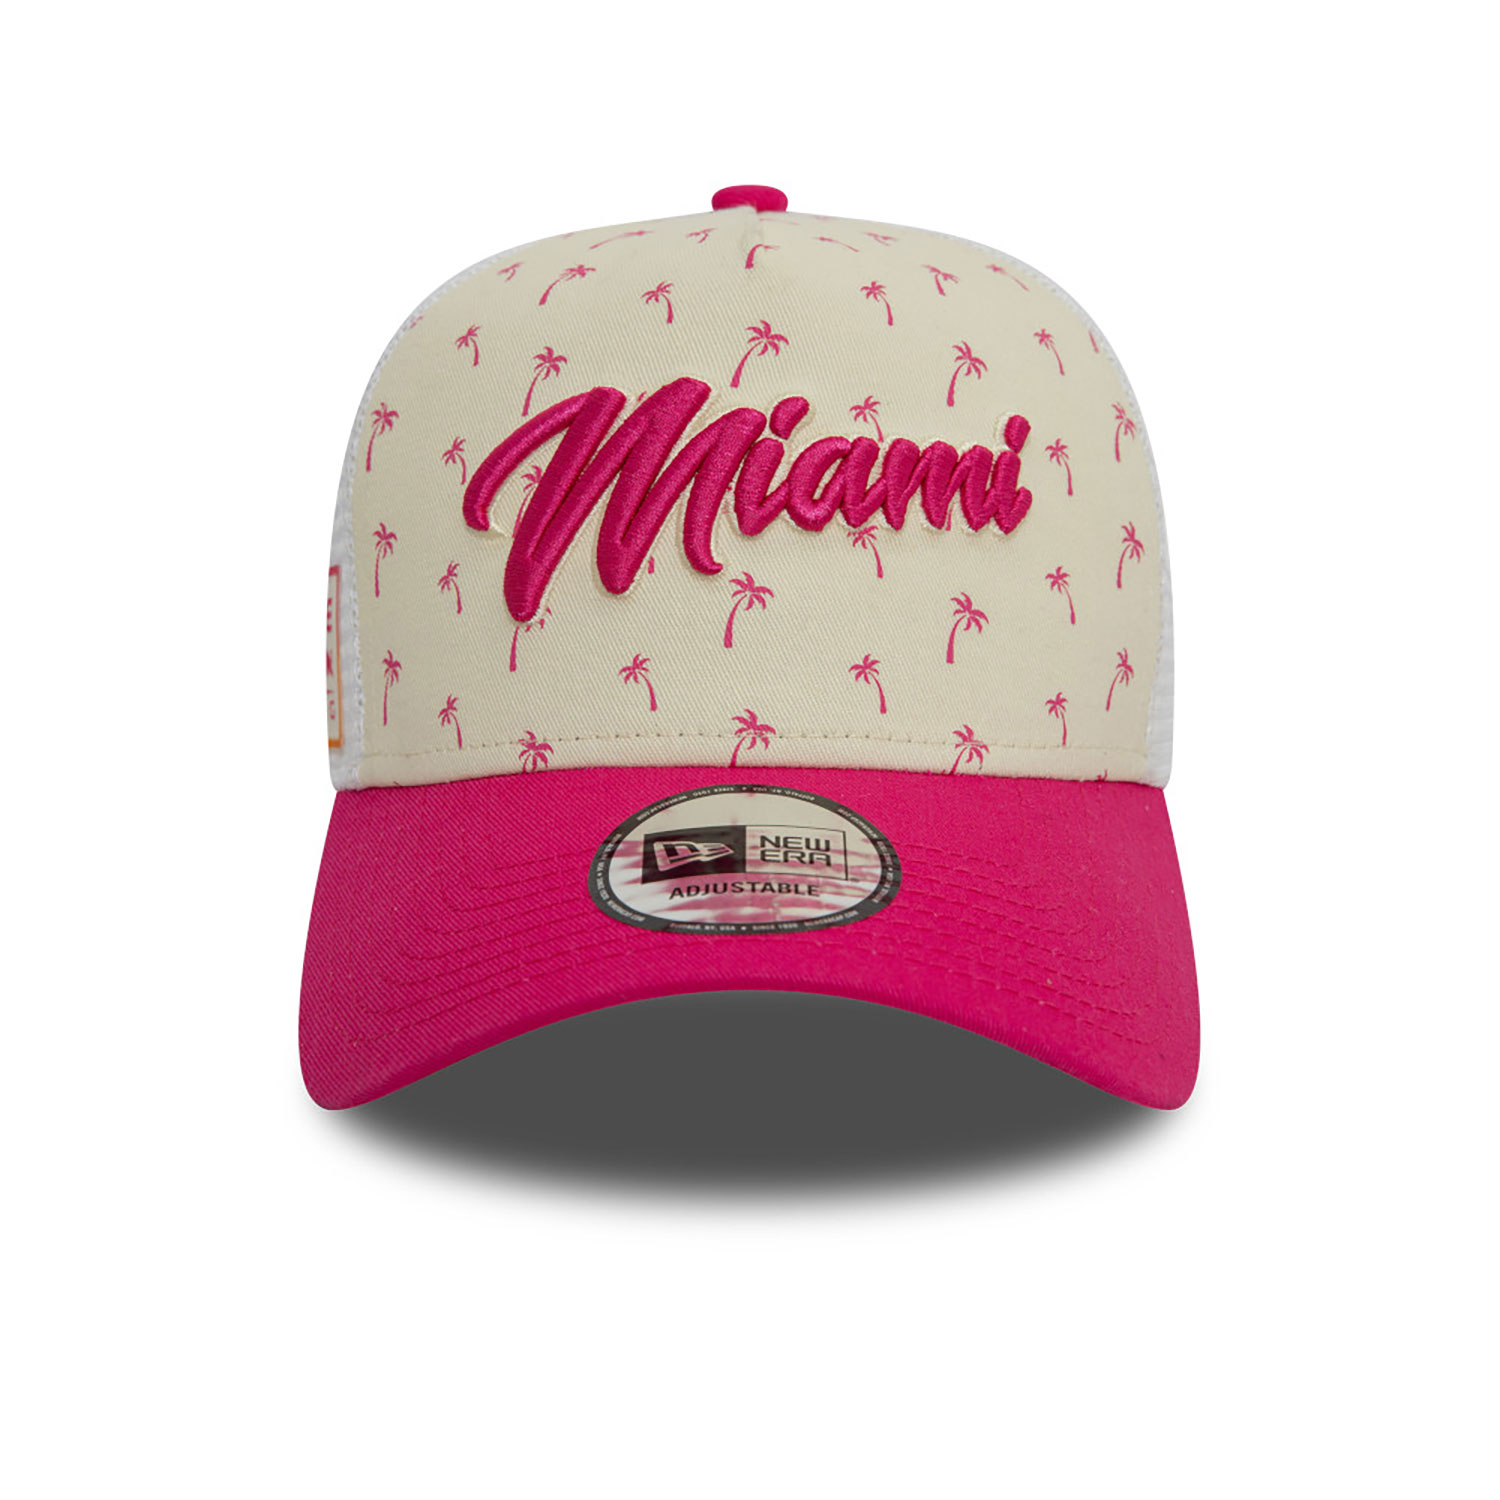 Gorra Miami Race Special Red Bull Racing 9FORTY E-Frame Trucker